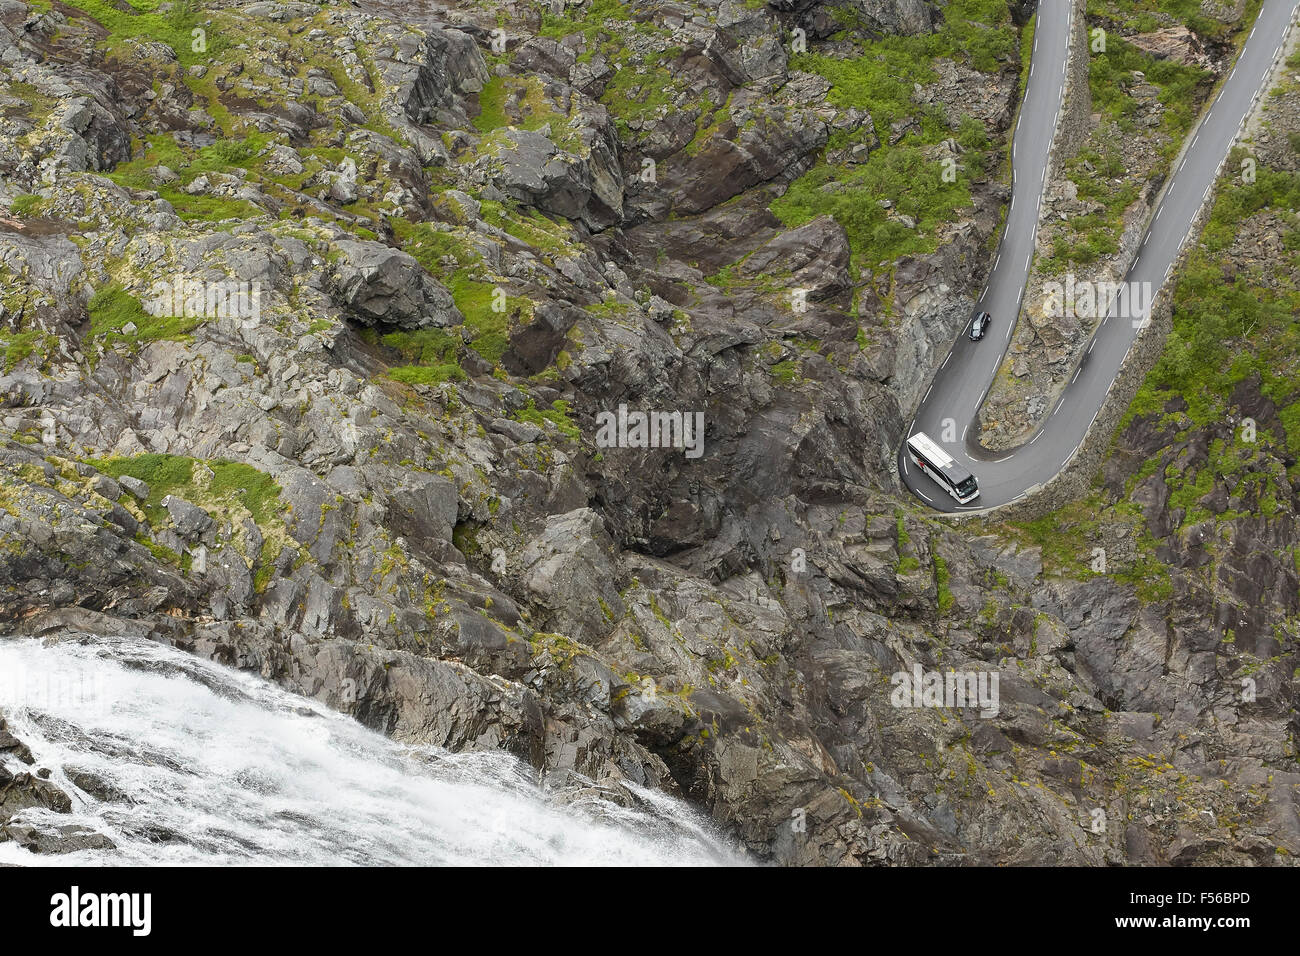 The Famous Hair Pin Bends Of The Trollstigen, In Norway. Stock Photo